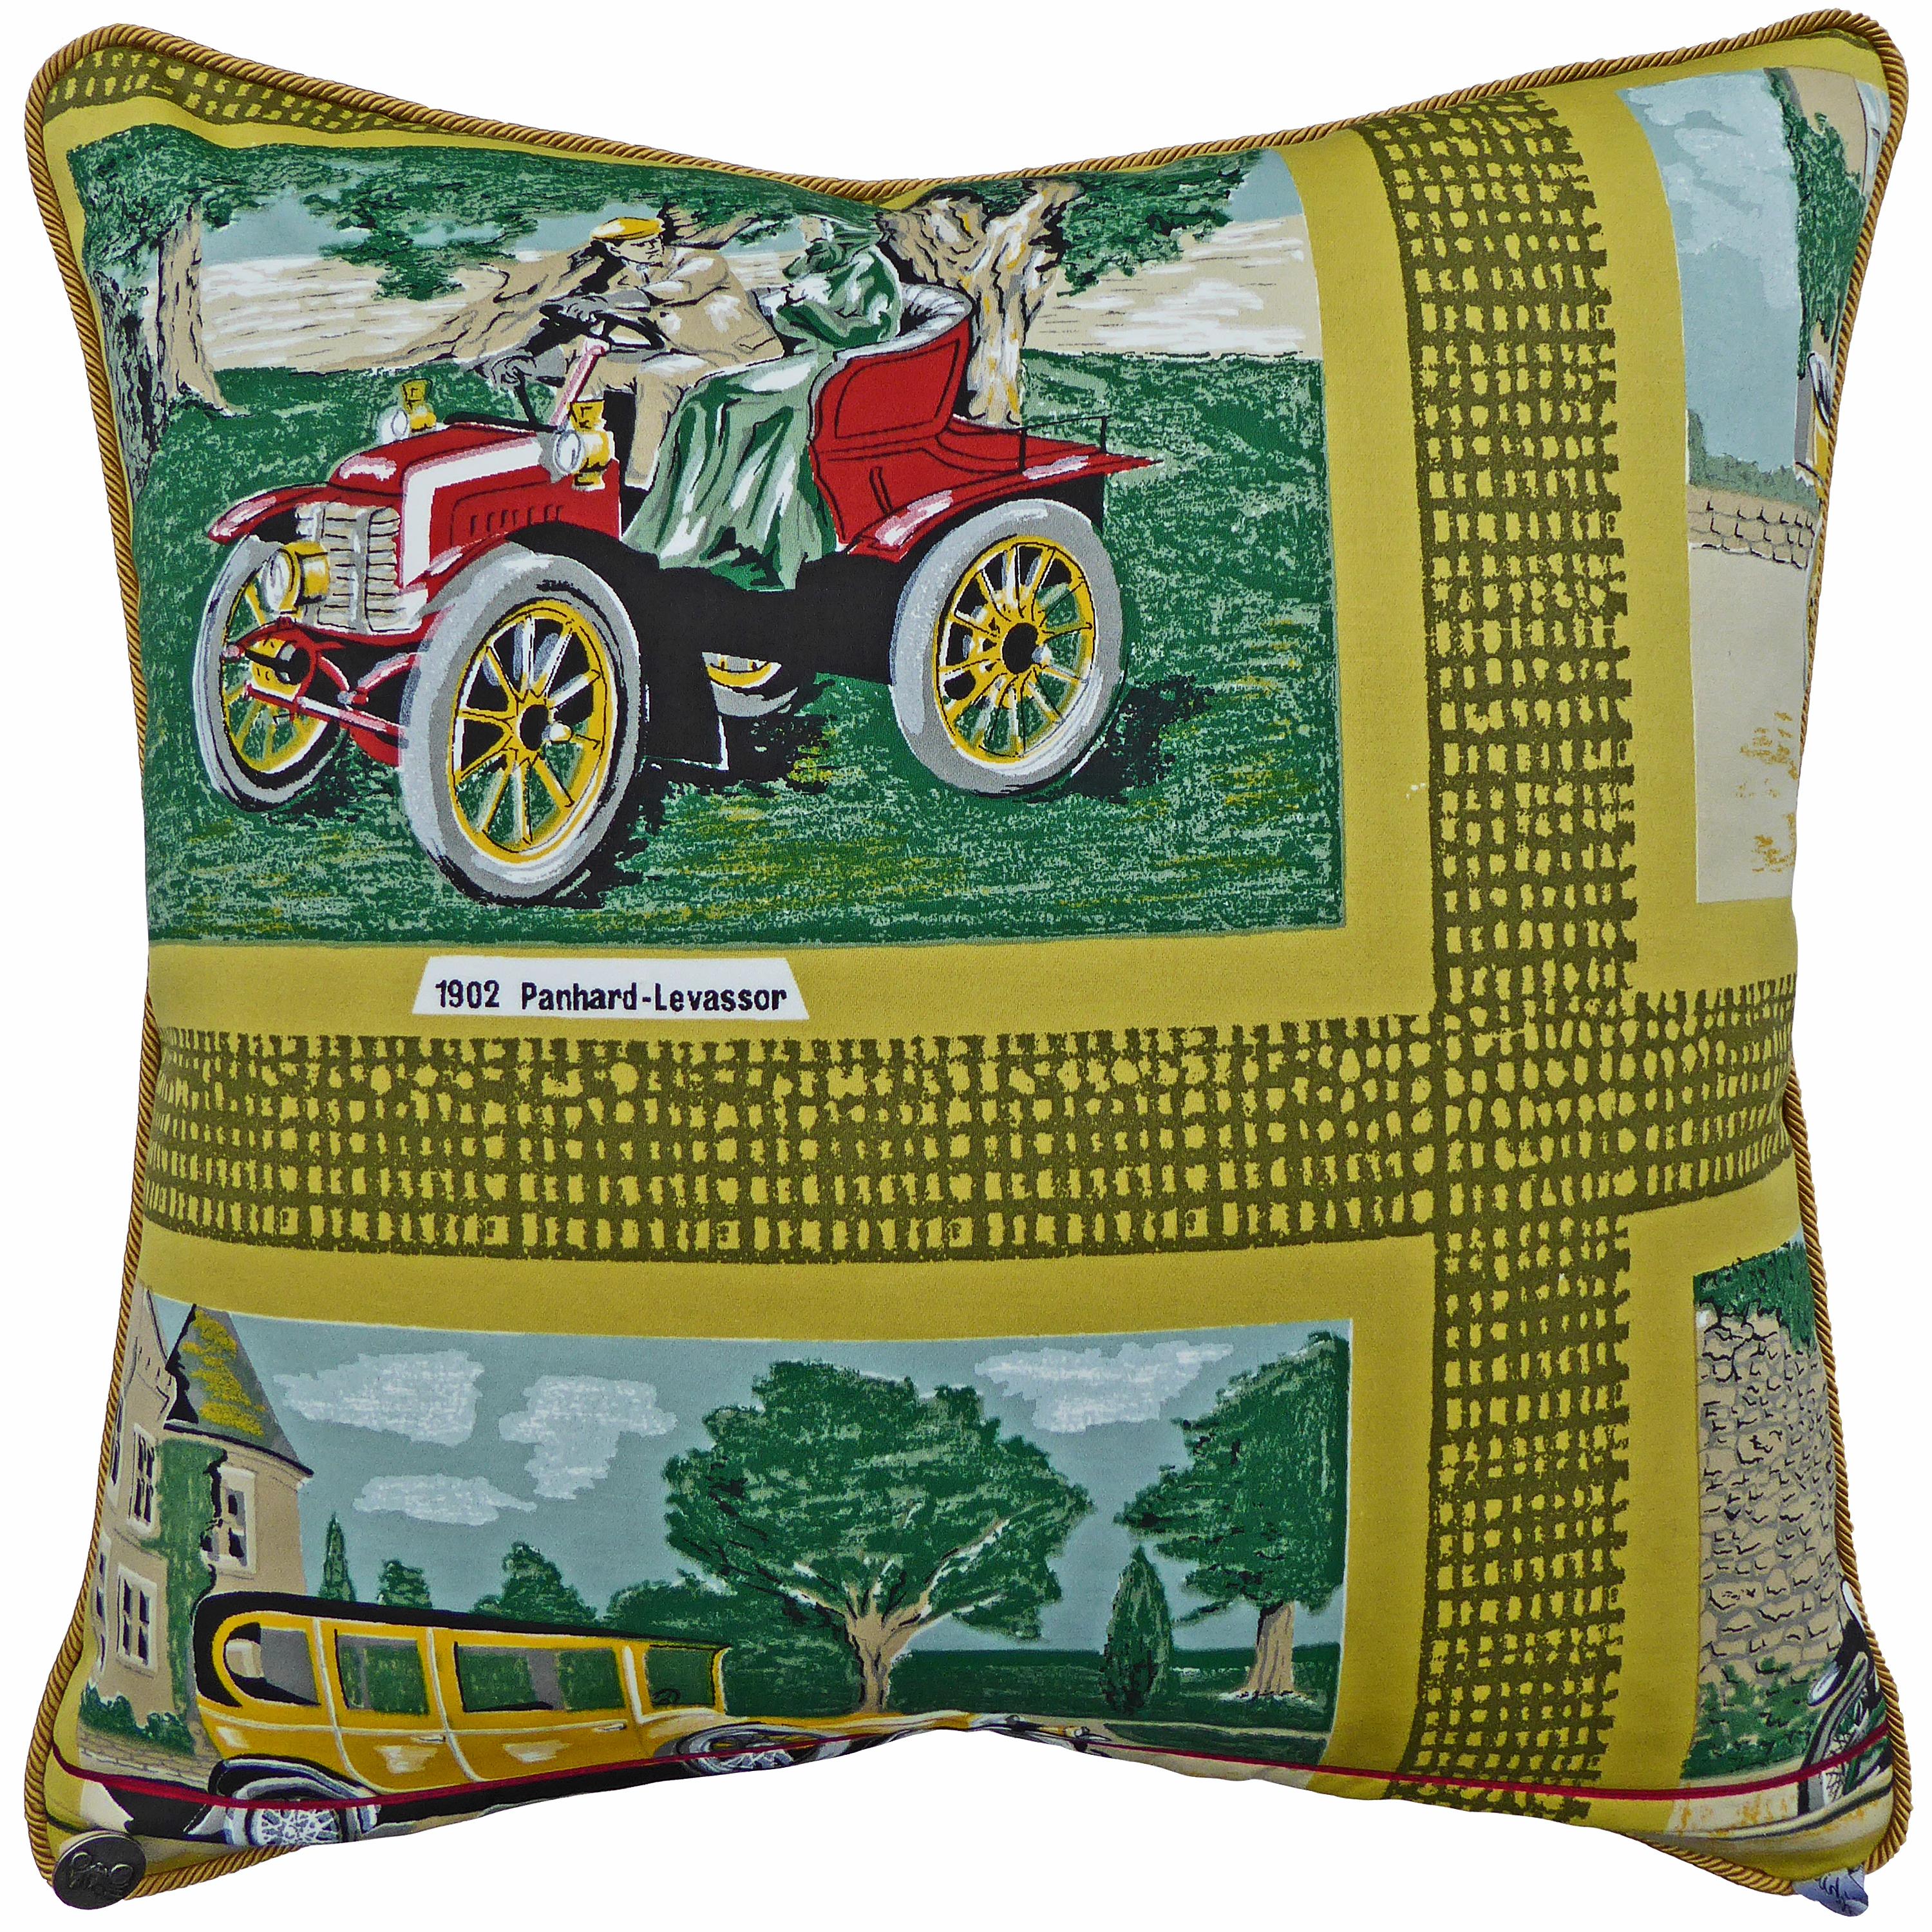 1929 golden arrow,
circa 1970
British bespoke-made luxury cushion created using original vintage fabric named ‘Models at Tiatsa Model Car Museum’ featuring famous veteran car models from the collection at The National Motor Museum in